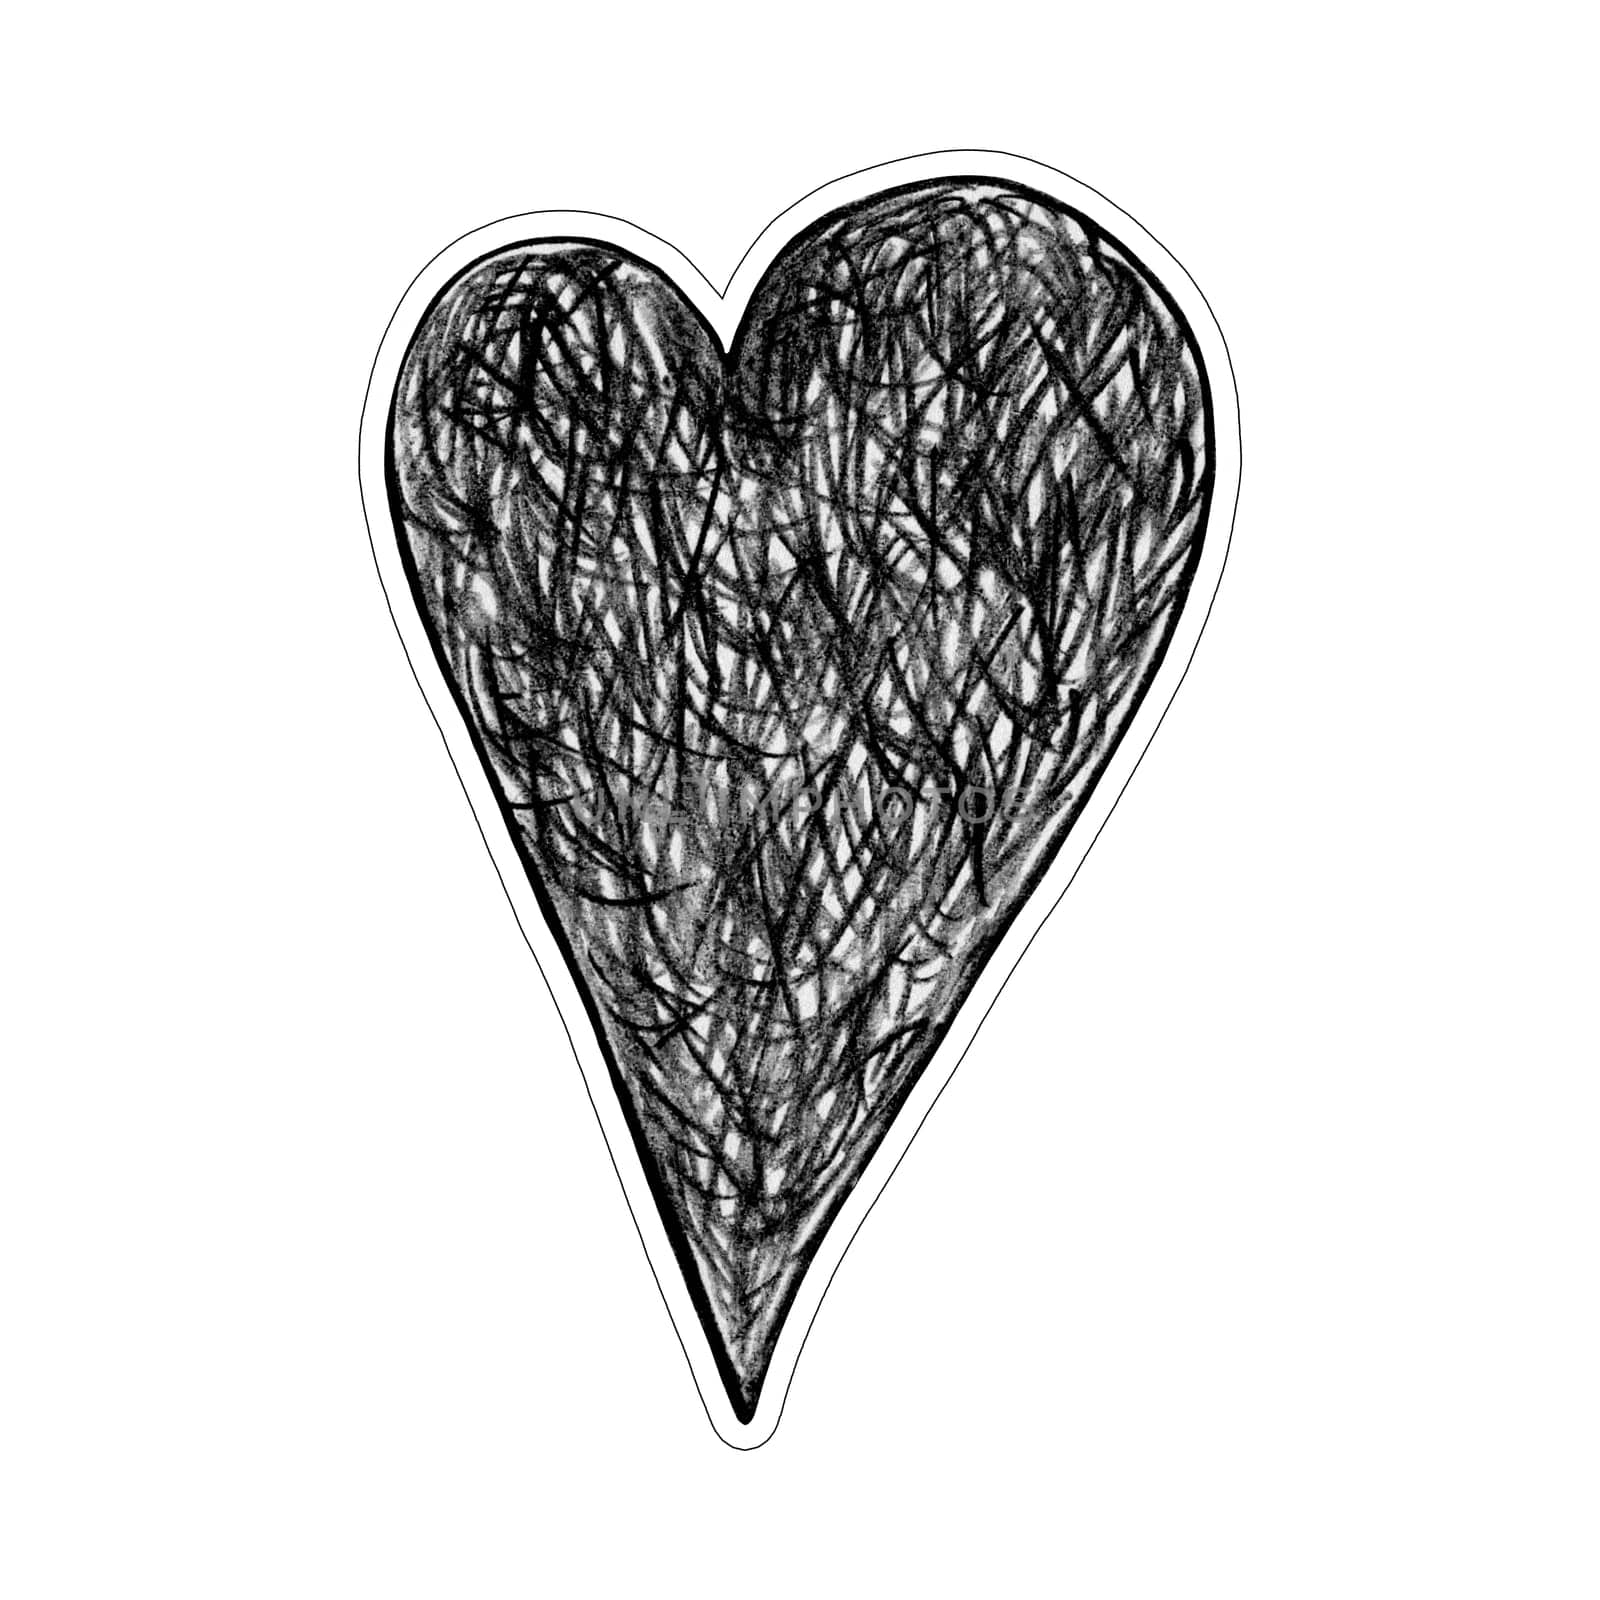 Black Heart Sticker Drawn by Colored Pencil. Heart Shape Isolated on White Background. by Rina_Dozornaya